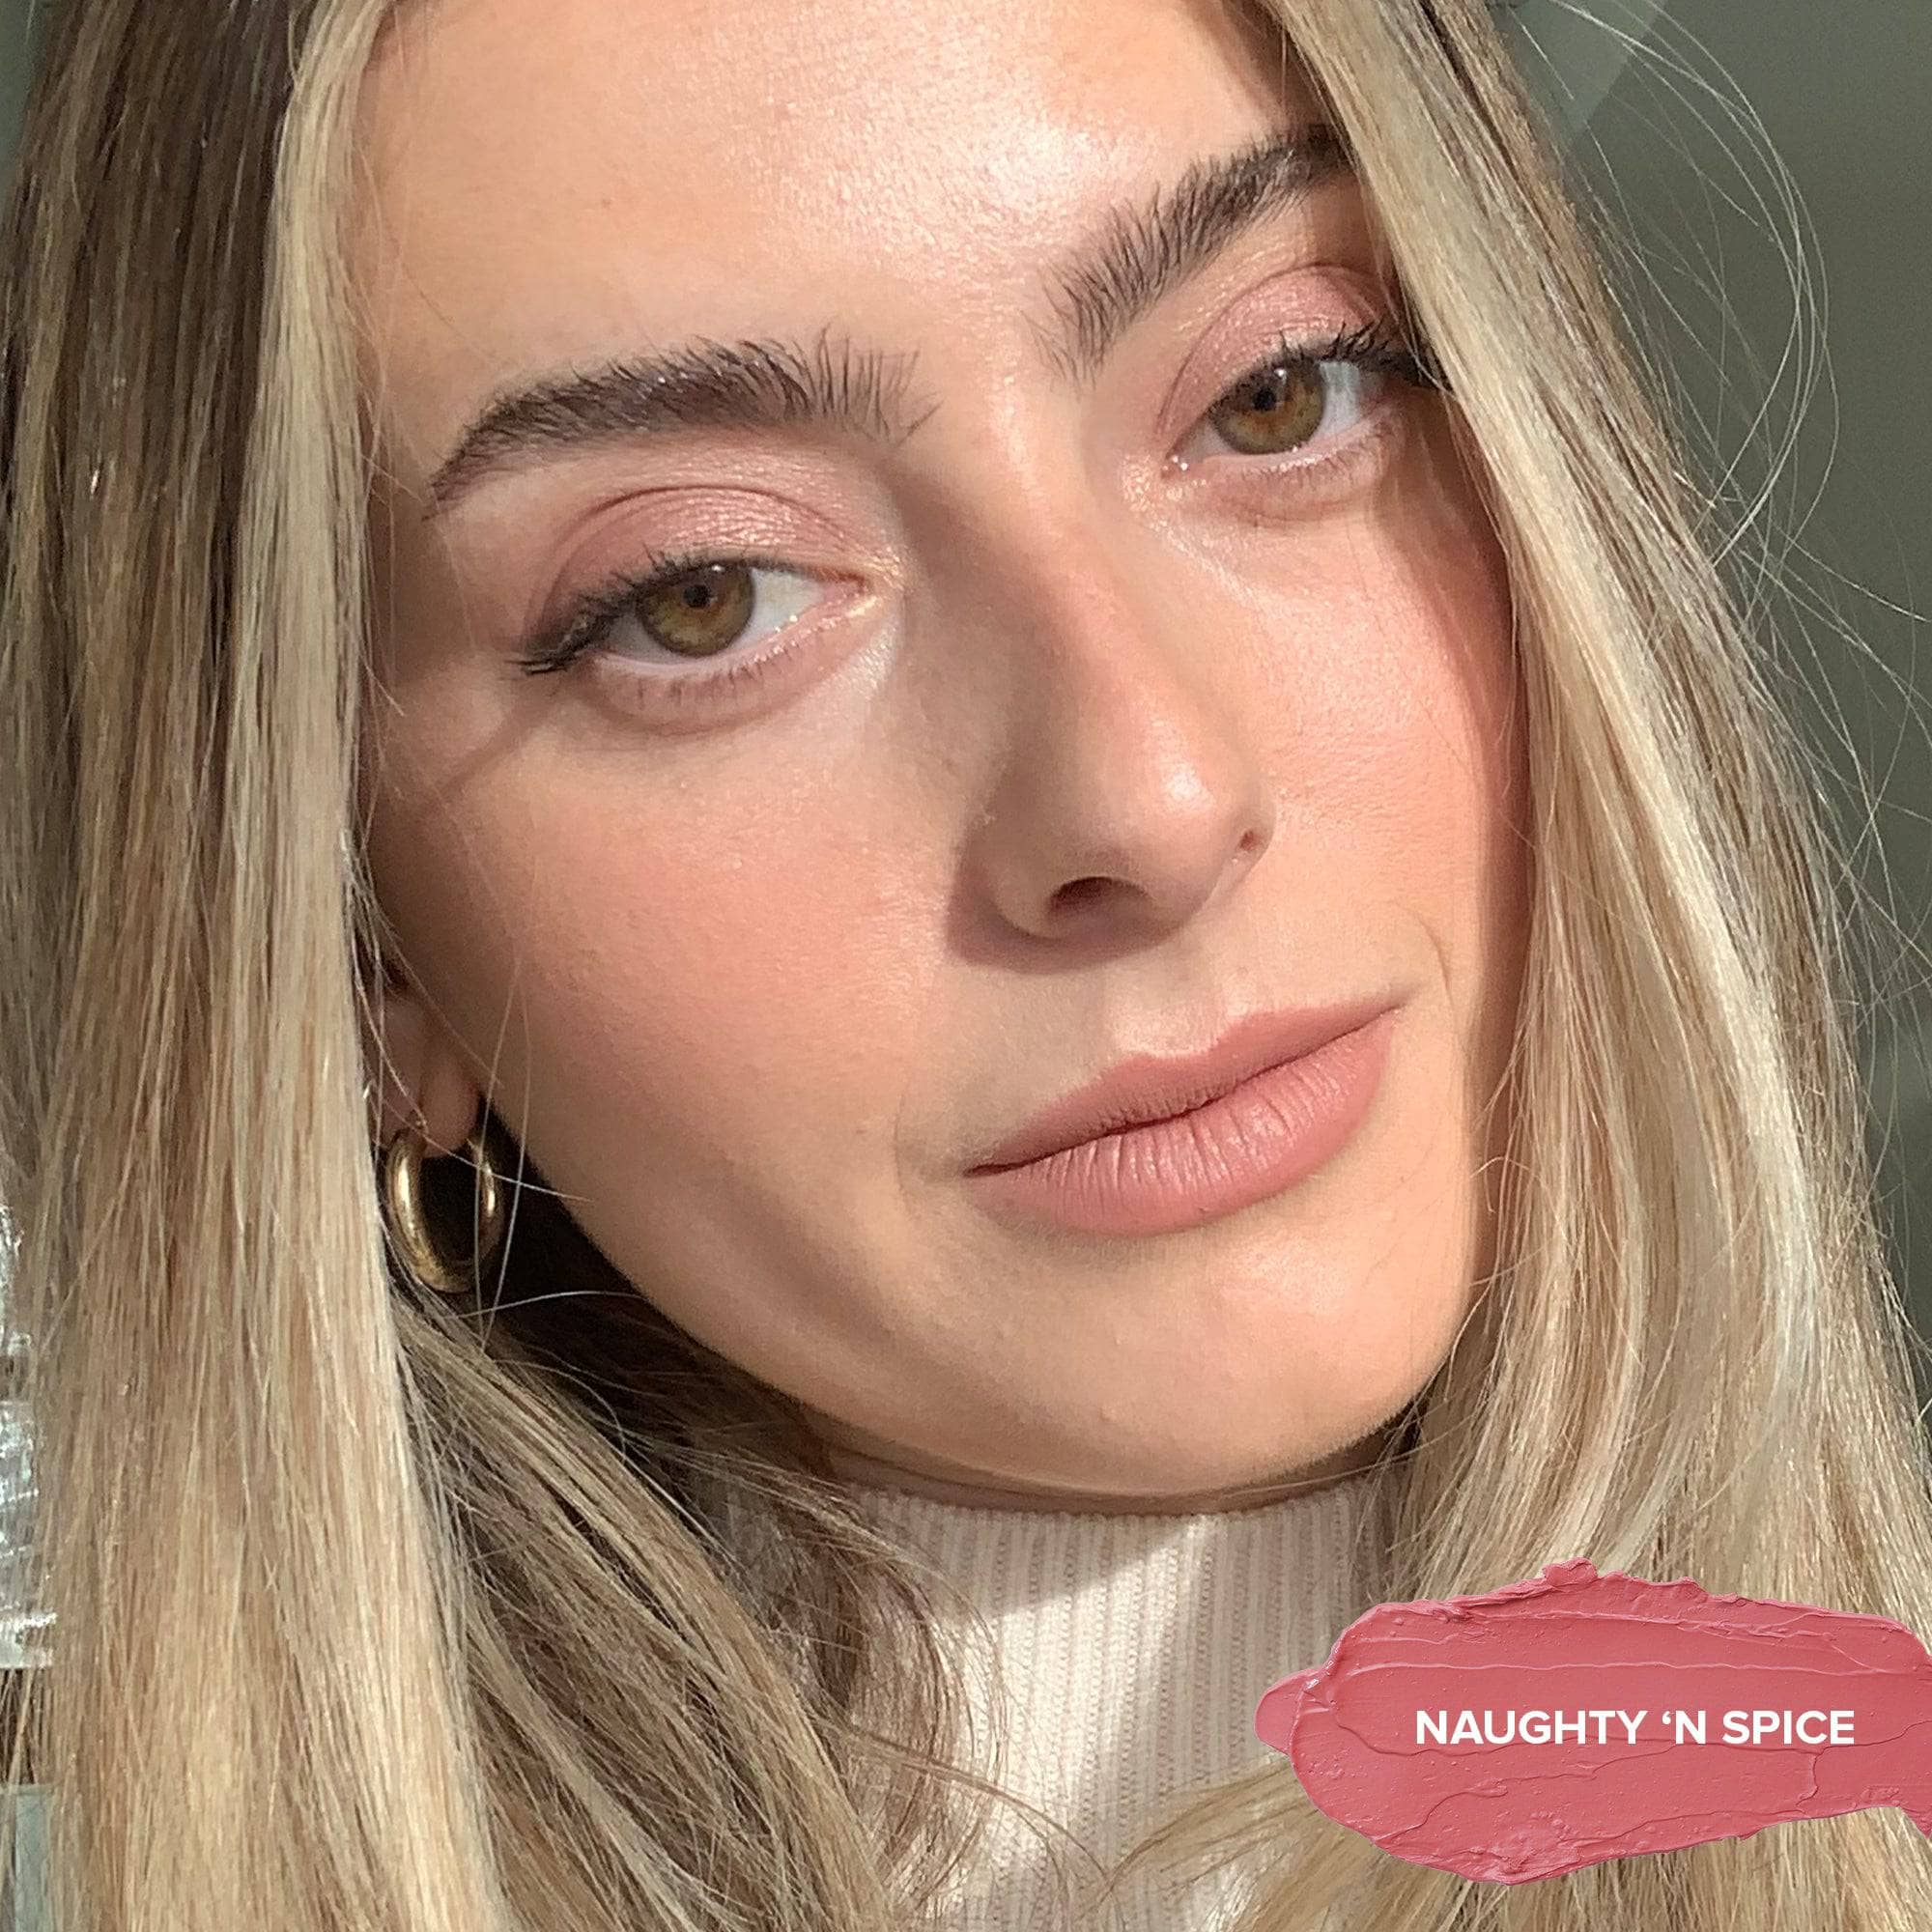 Taylor Frankel wearing Nudies Blush Stick in shade Naughty N' Spice